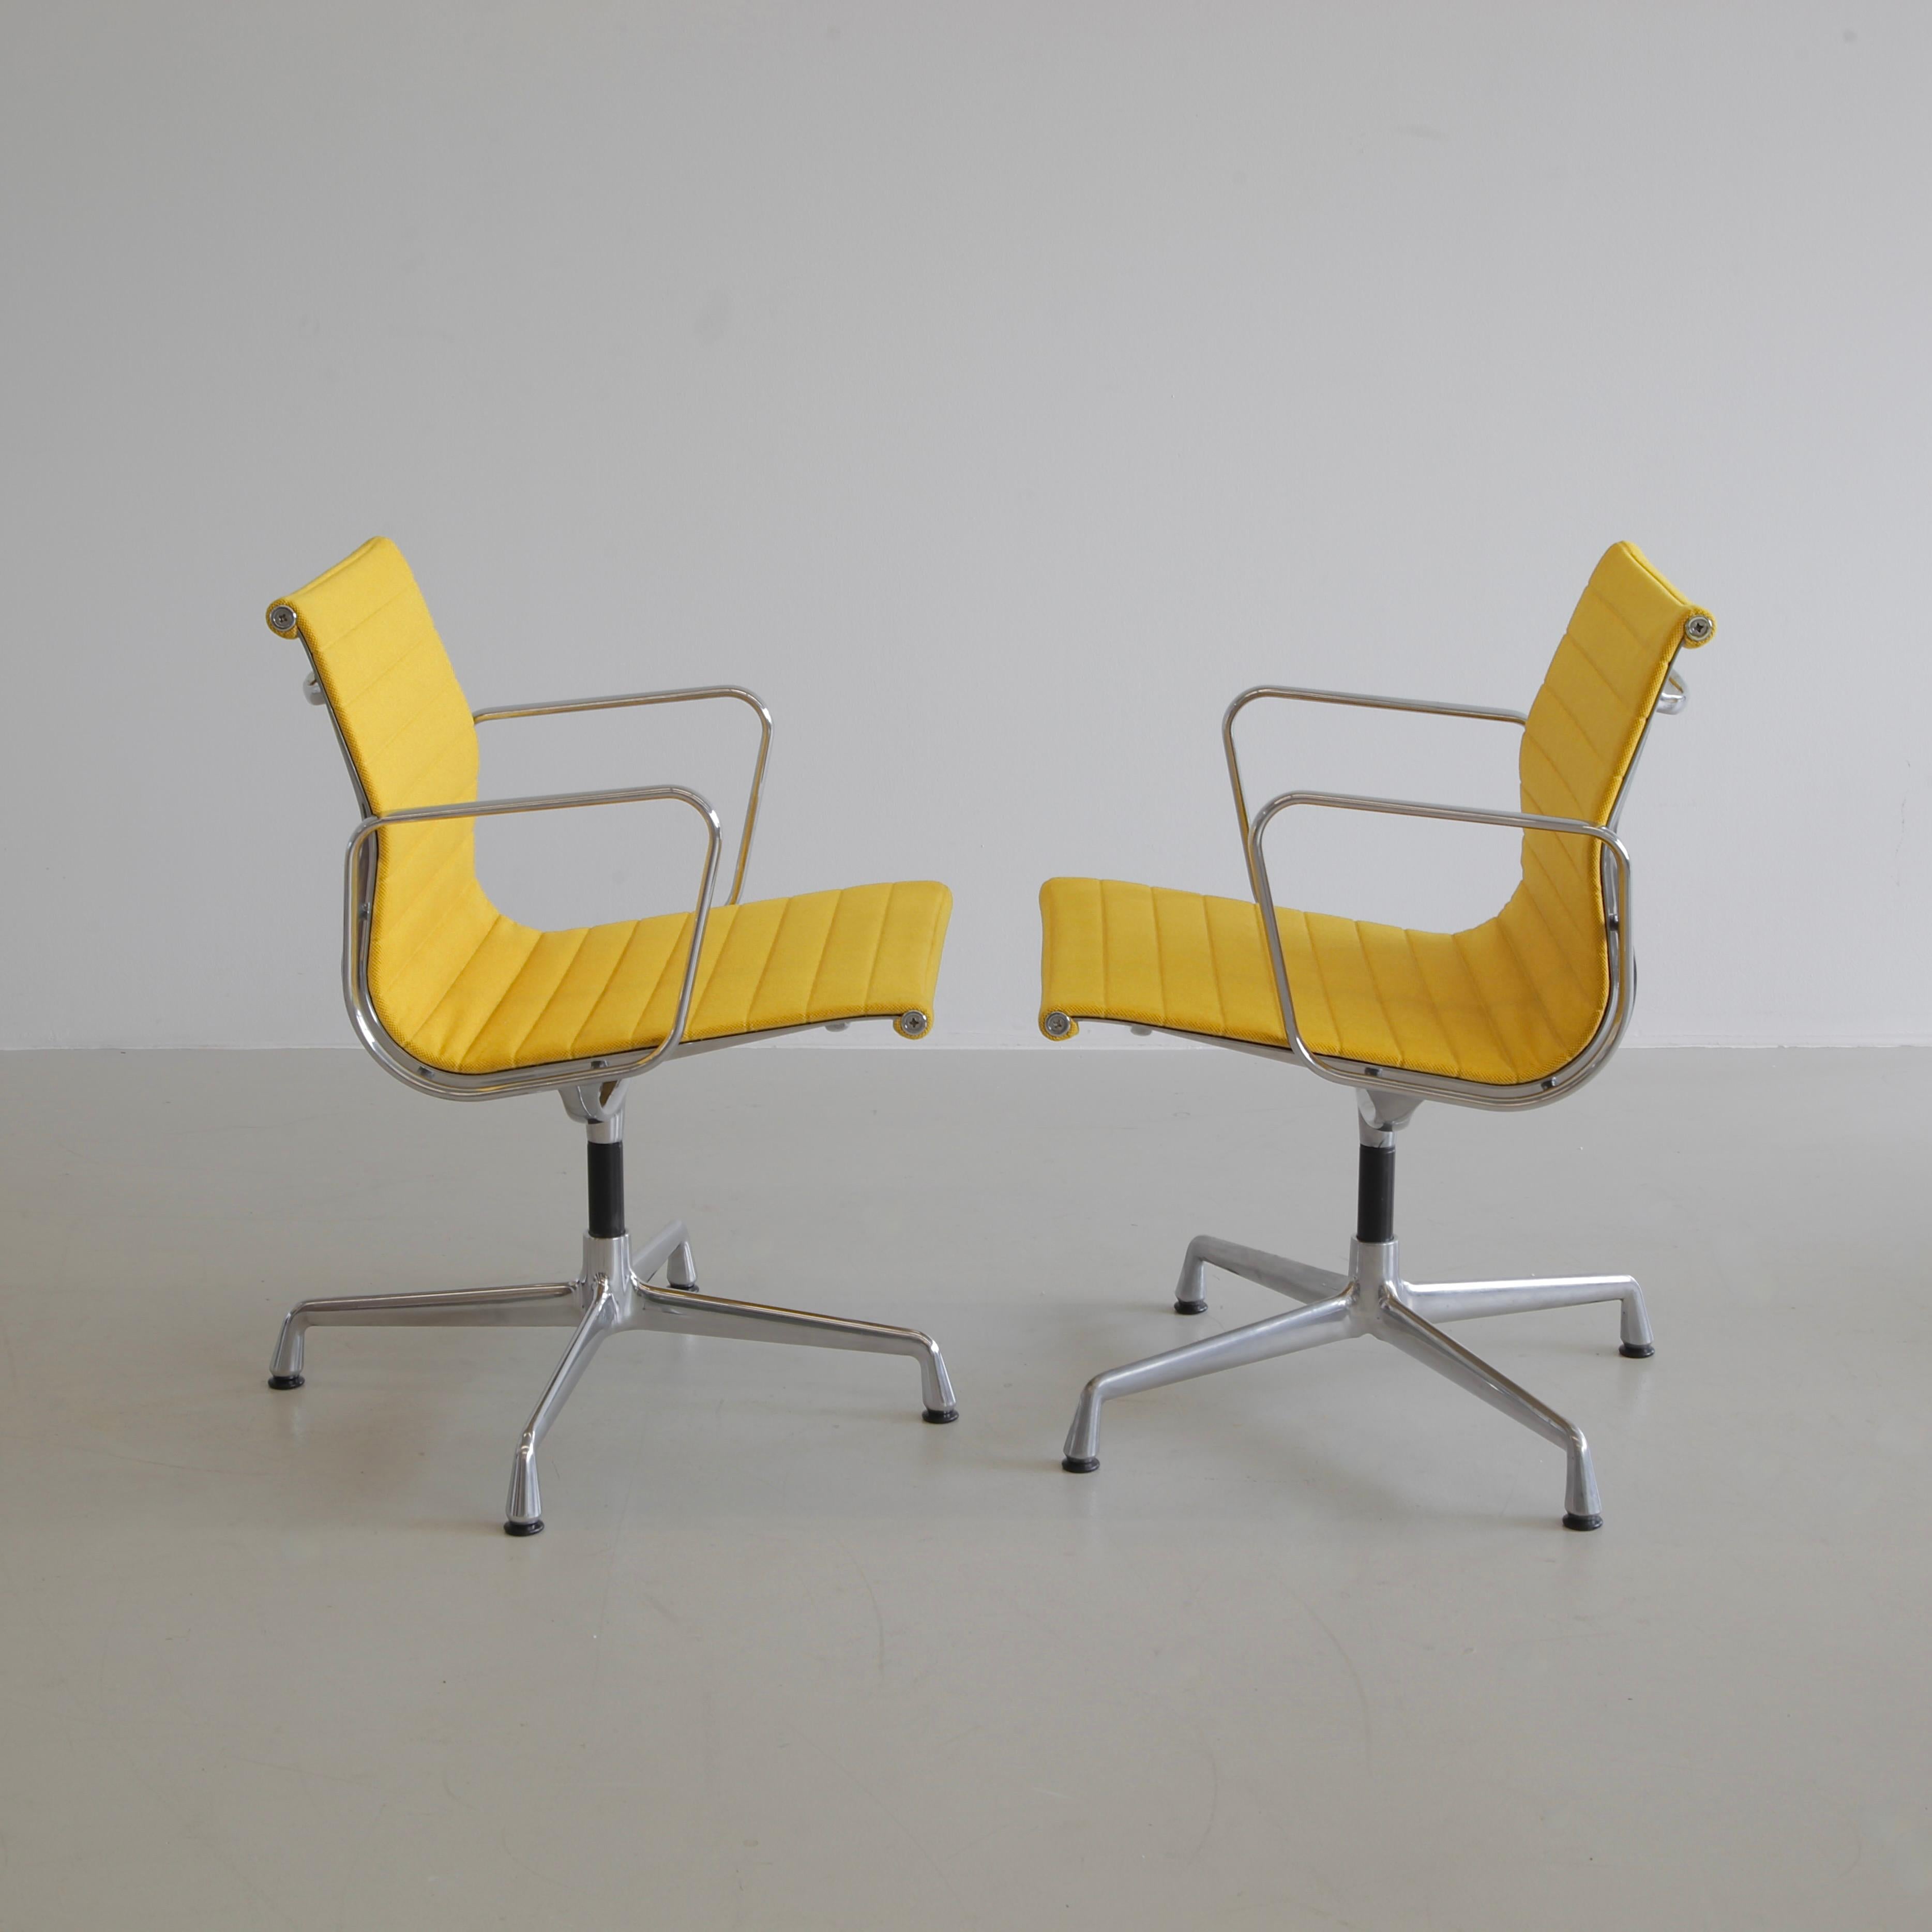 Aluminium office chairs designed by Charles and Ray Eames. Germany, VITRA, dates vary on the base.

A beautiful set of yellow hopsack and chromed aluminium rotating chairs with armrests. Best colour ever!

